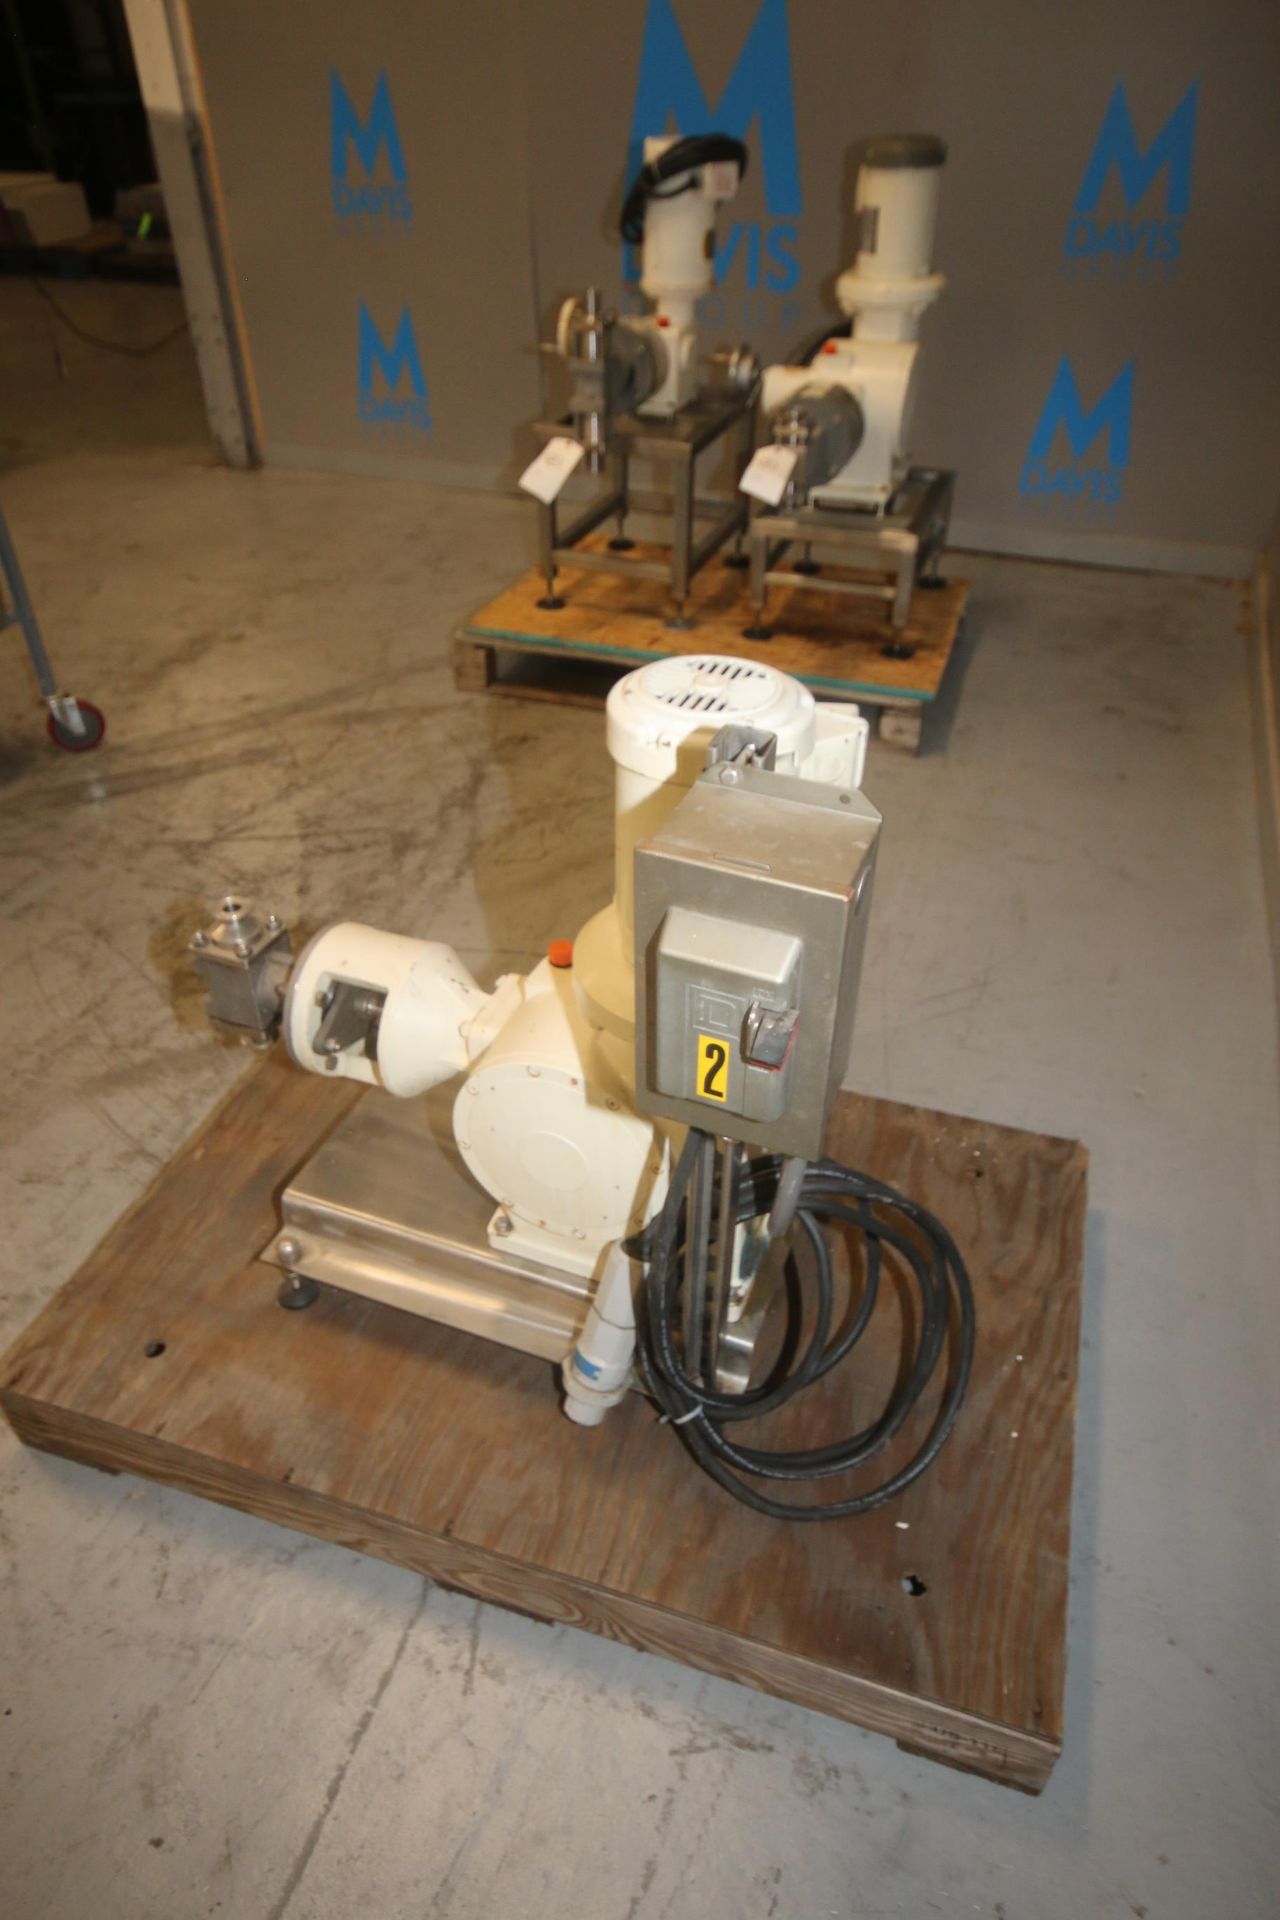 Bran - Lubbe Metering Pump, Type N-D431, S/N A9275, with 1.5" Clamp Type Connections, US Motors 2 hp - Image 9 of 9